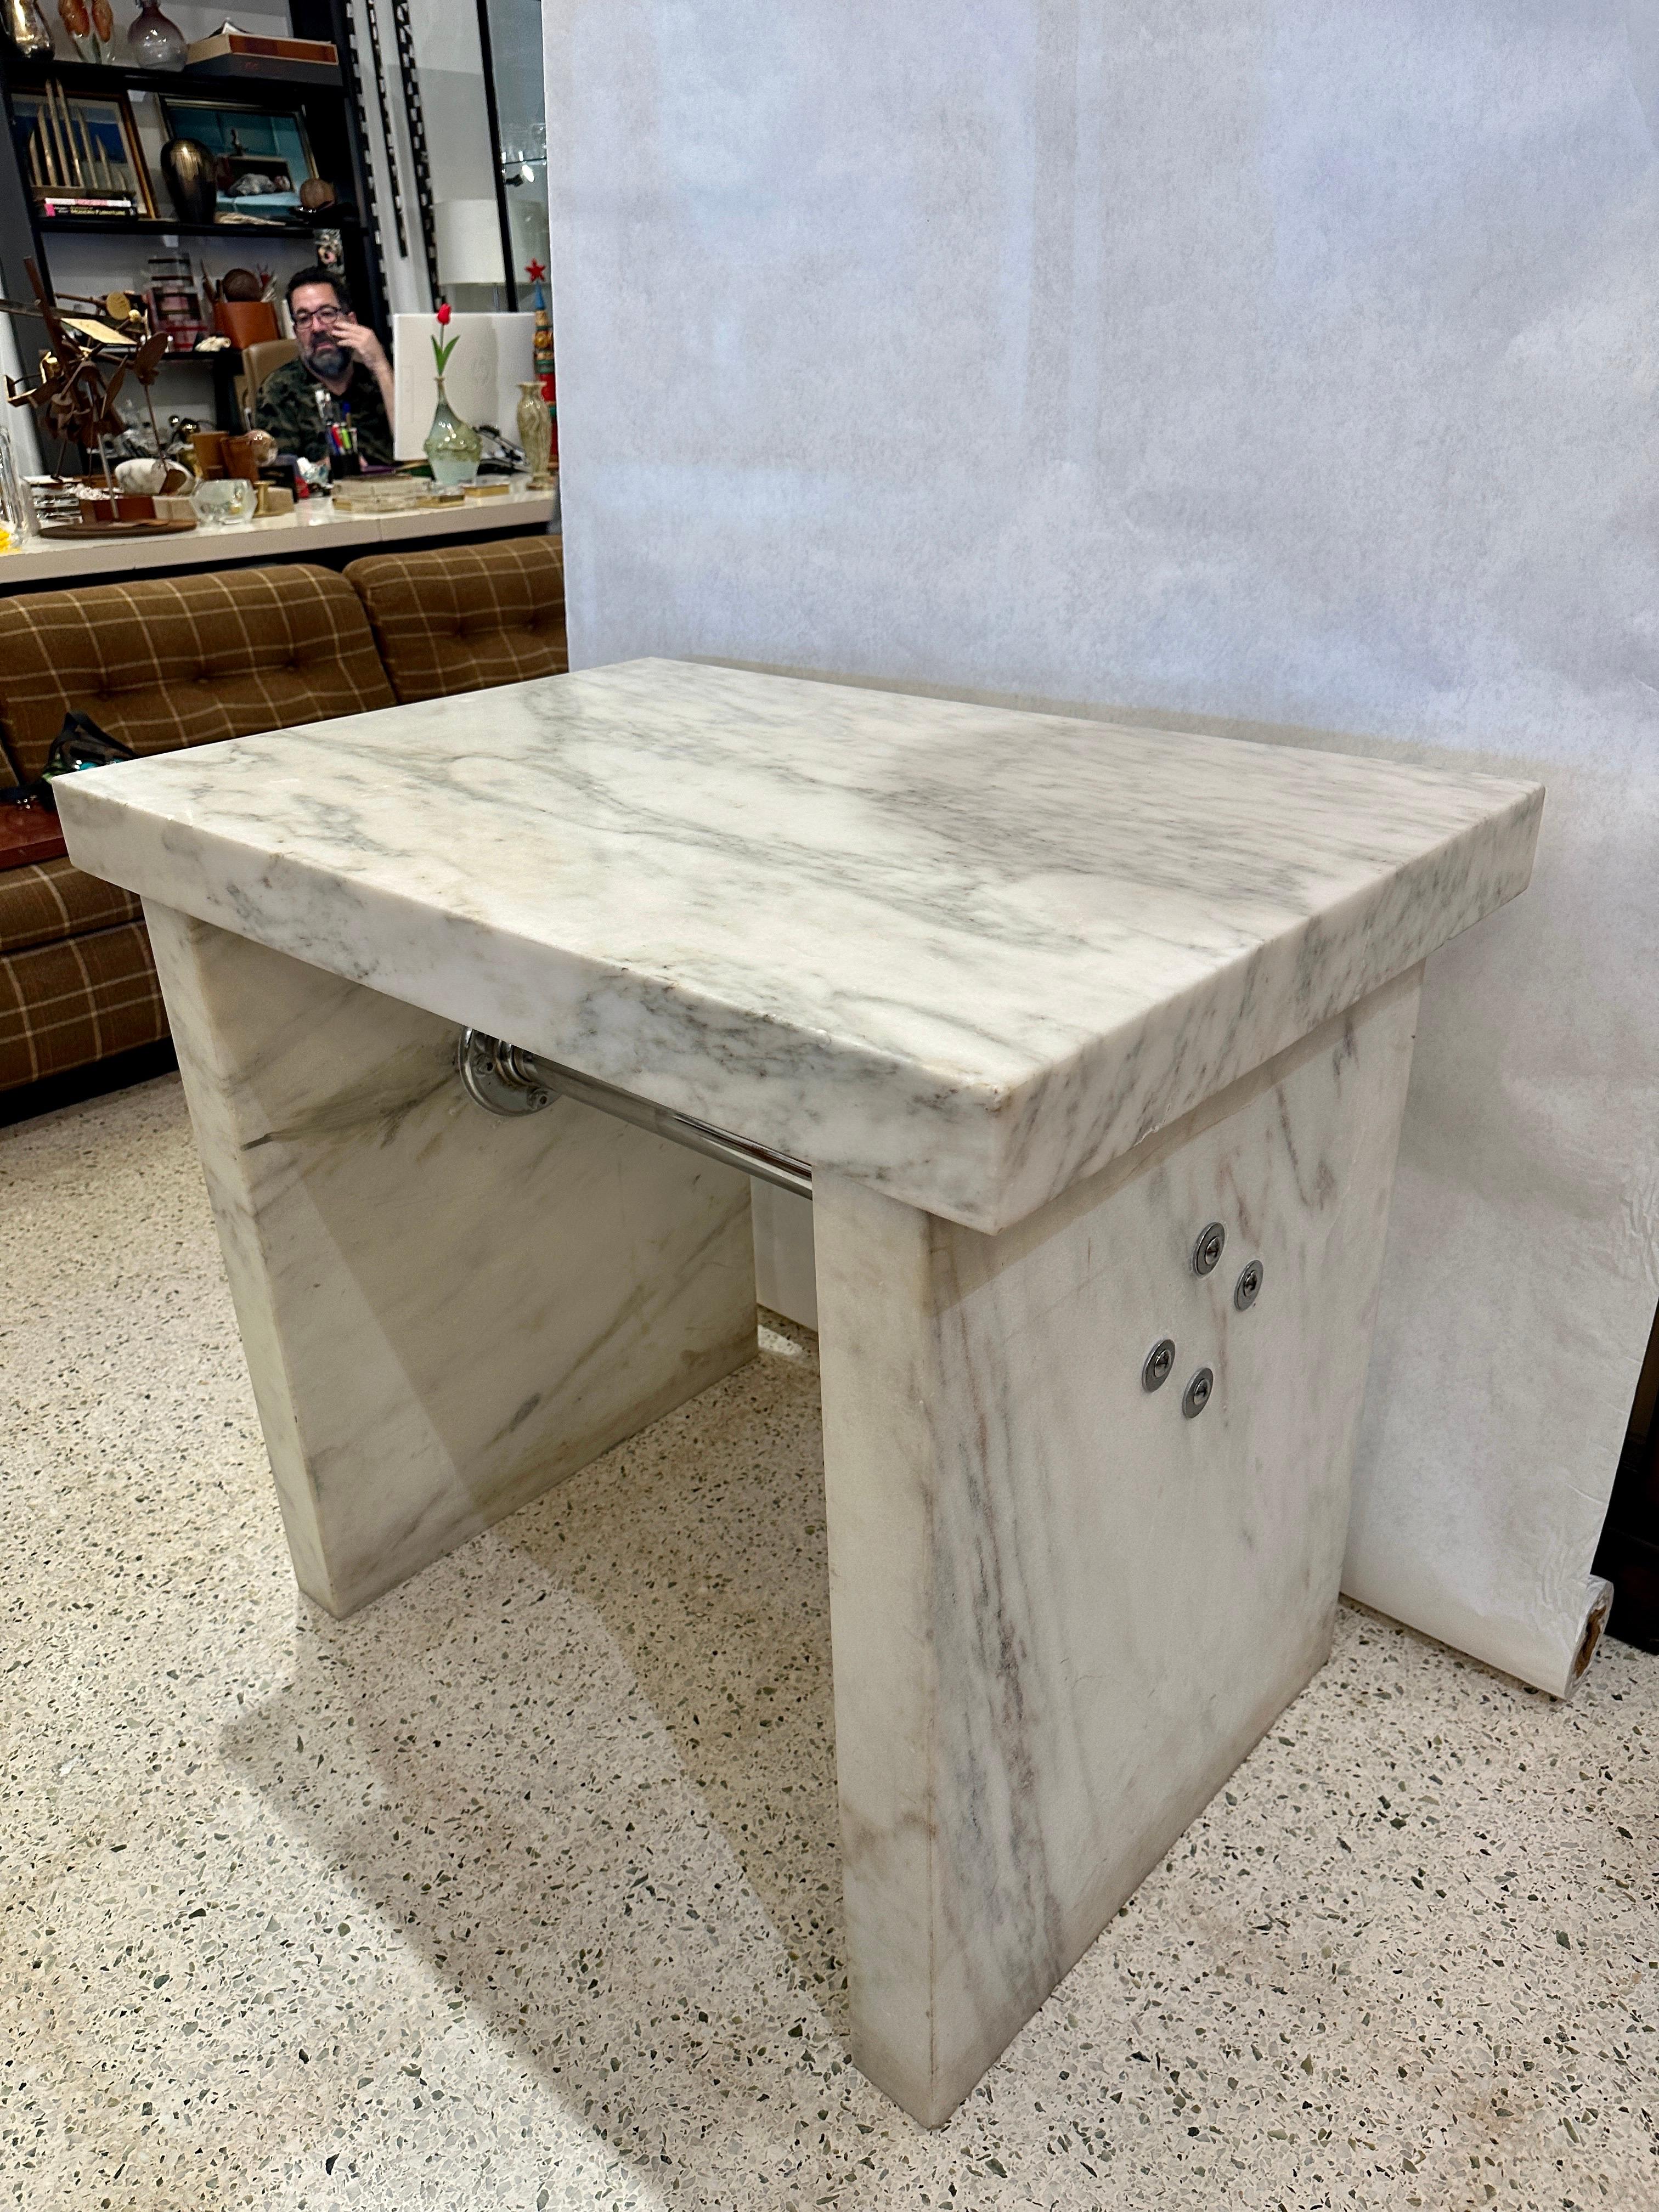 This is an original chocolatier/ candymakers marble slab table to cool the chocolate and mold it.  Sourced in Portland, Oregon.  This is comprised of 3 very thick white marble slabs (3 inches thick) with a central chrome stretcher to keep it solidly